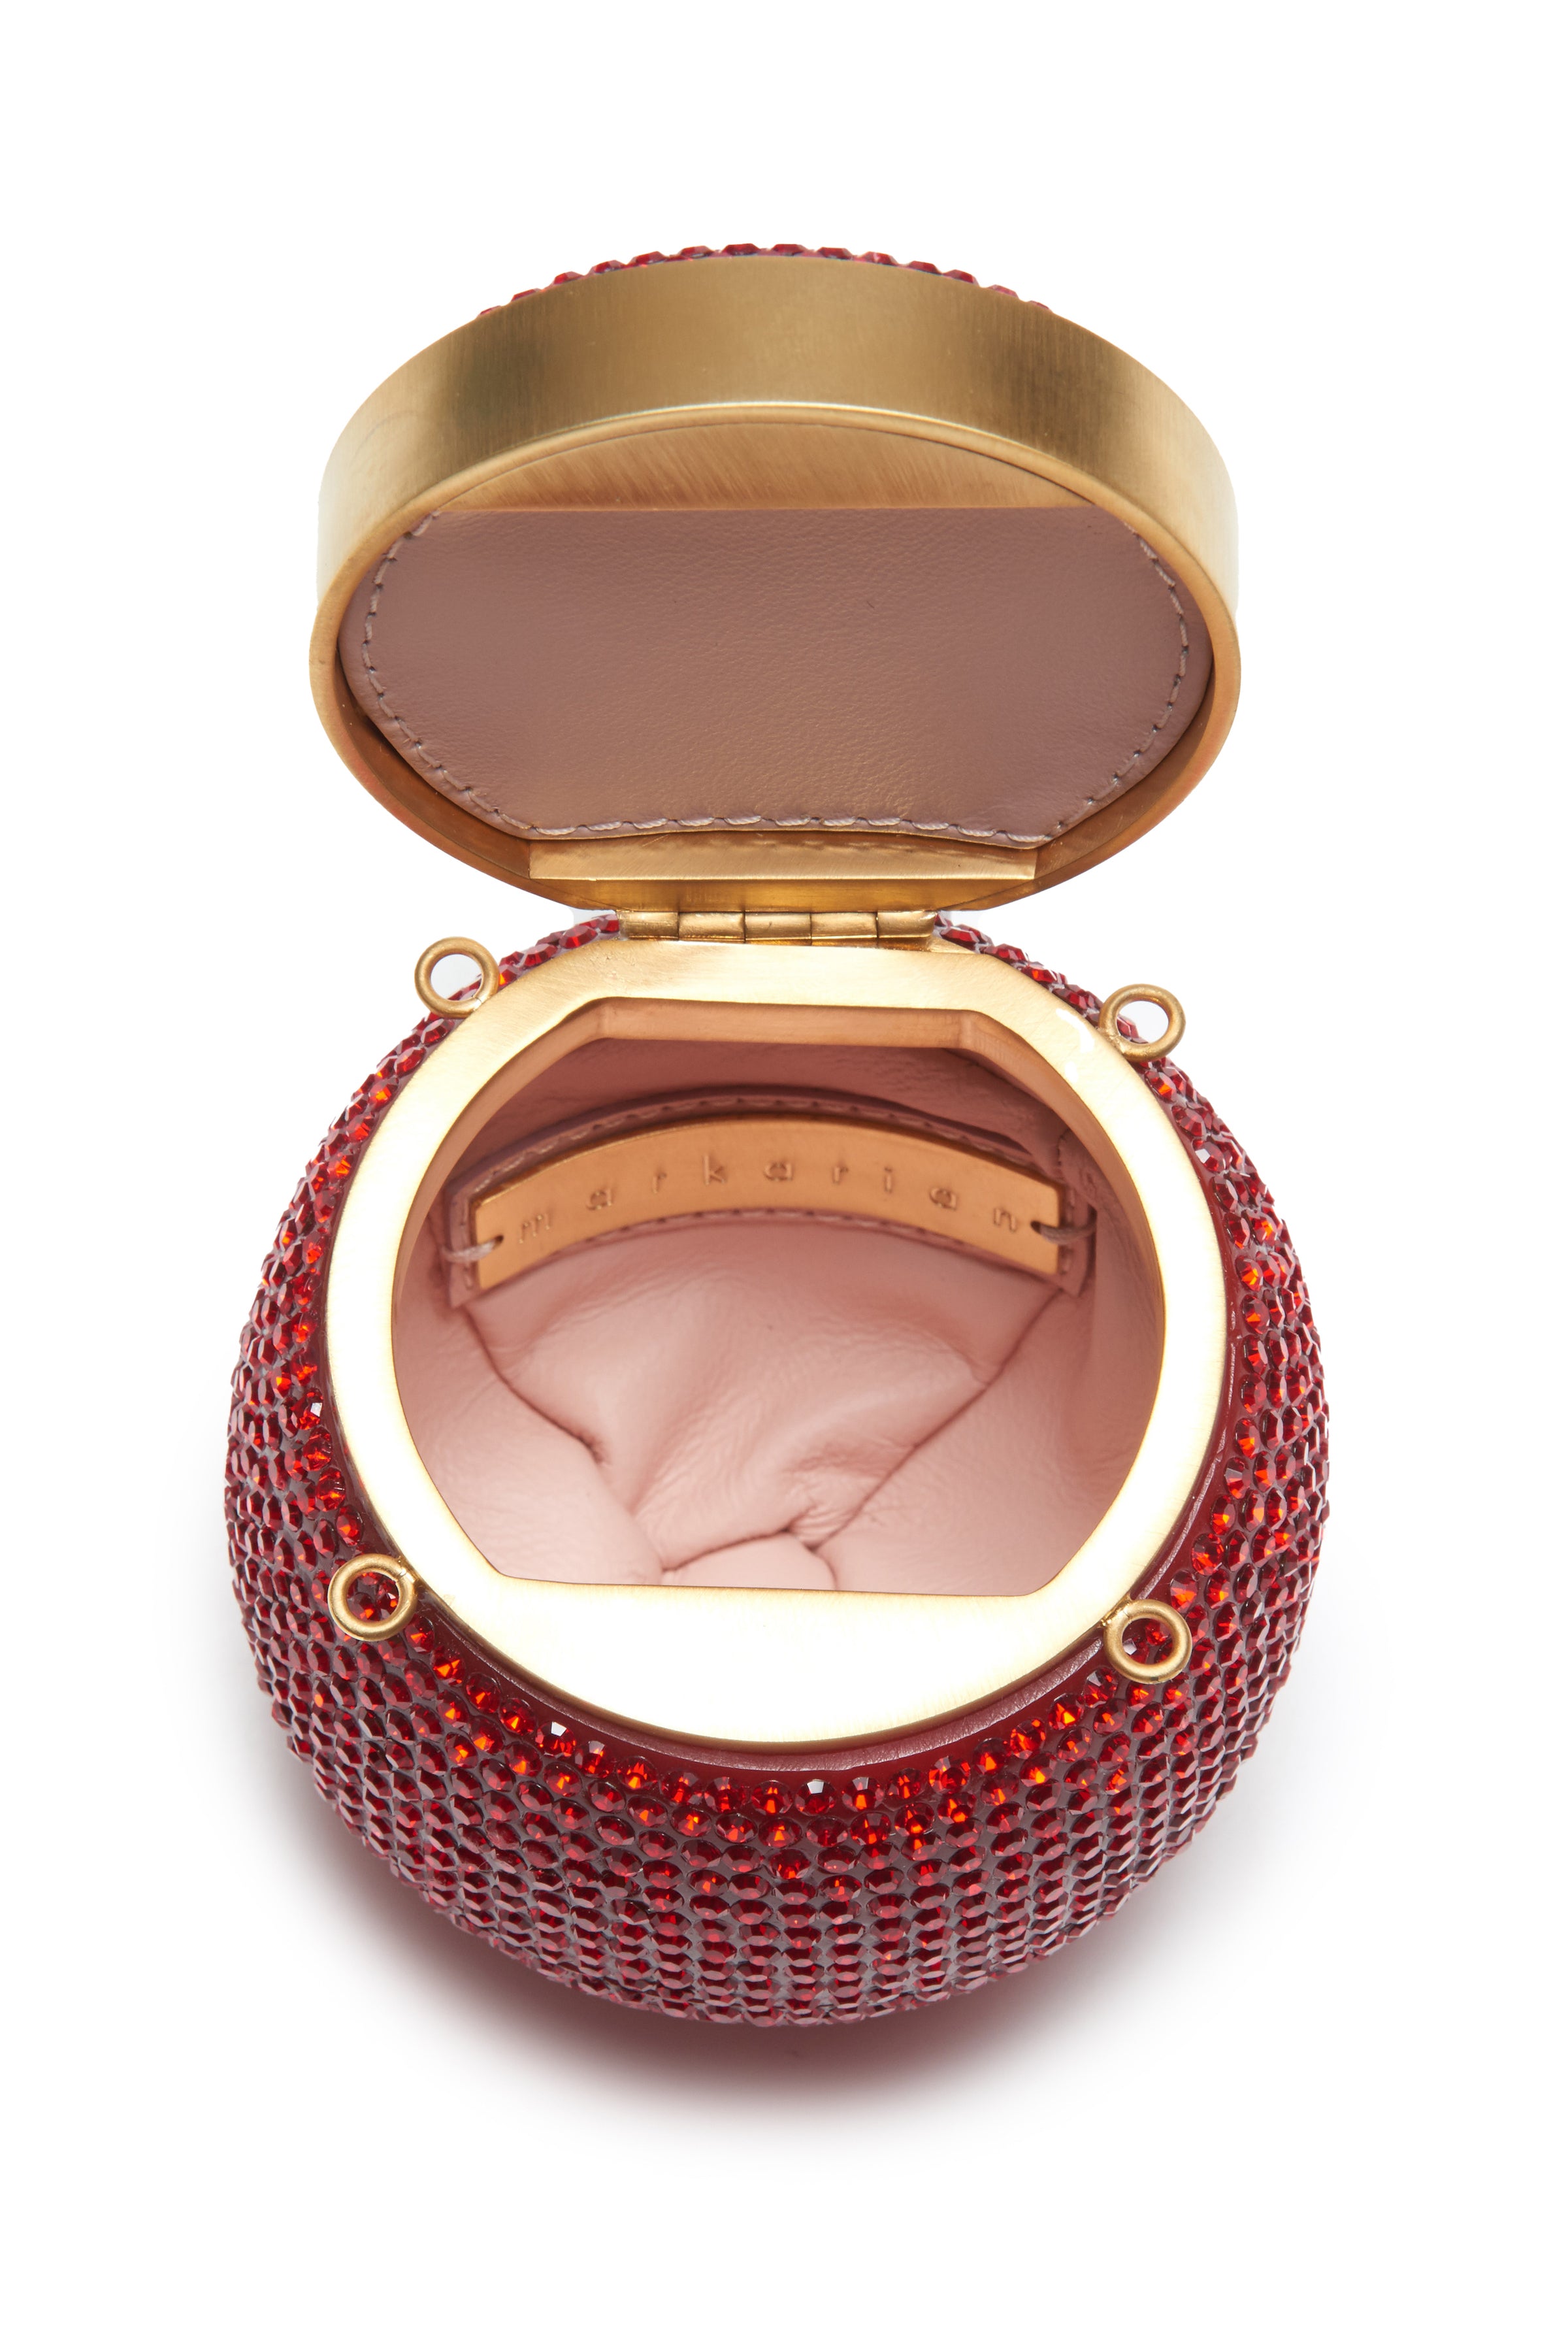 May Red and Gold Round Clutch